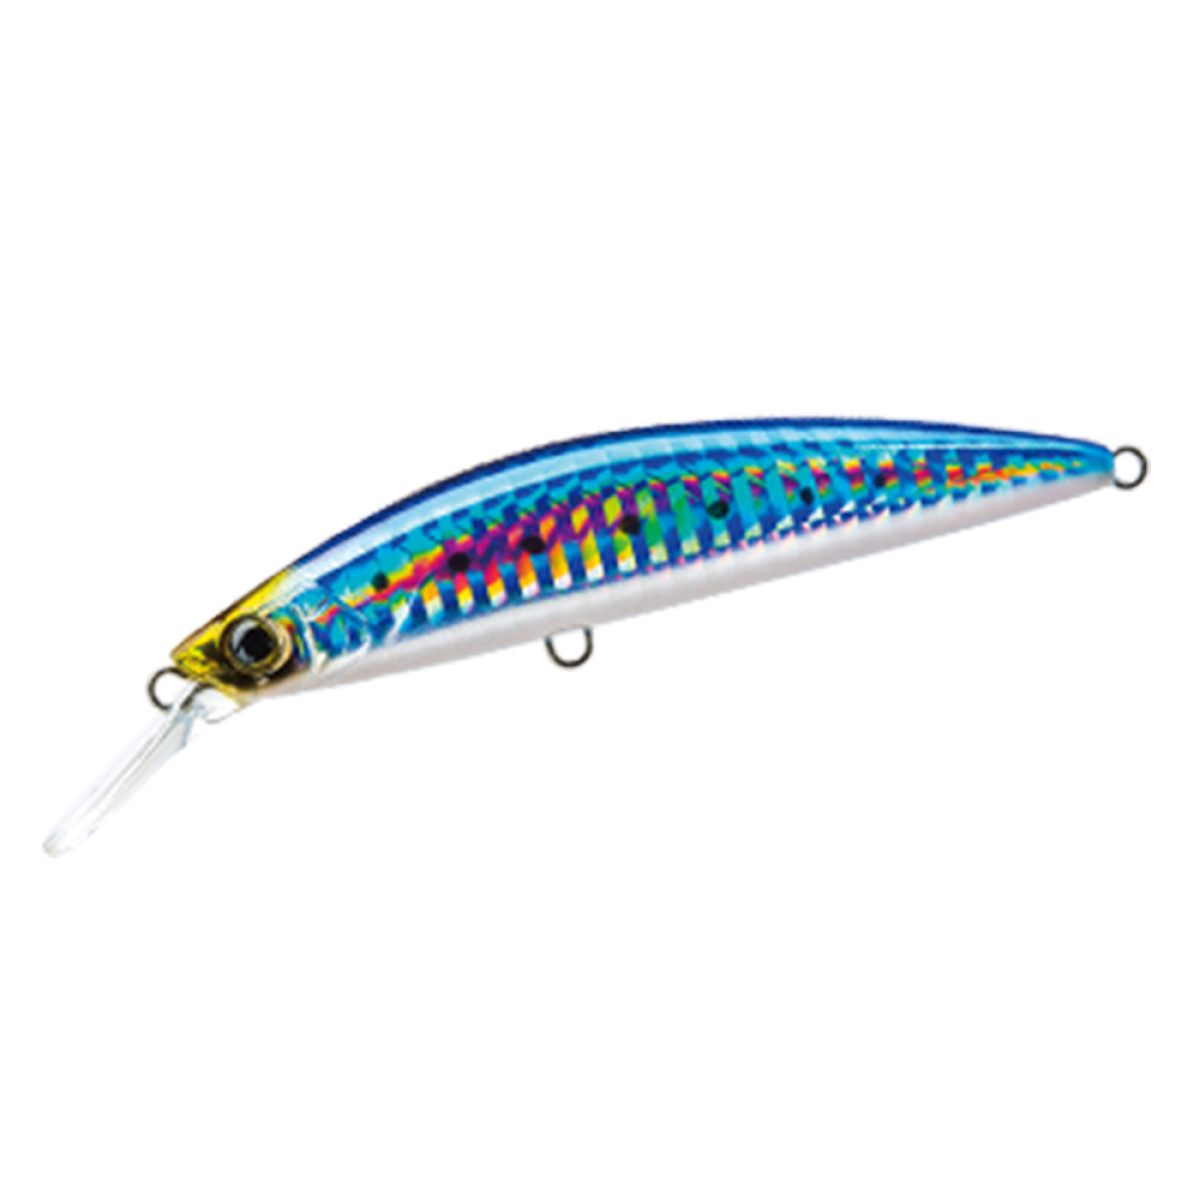 Duel Hardcore 90S Heavy Sinking Minnow Lure, Ocean7, Fishing, Kayaking,  Snorkelling, Camping, Boating